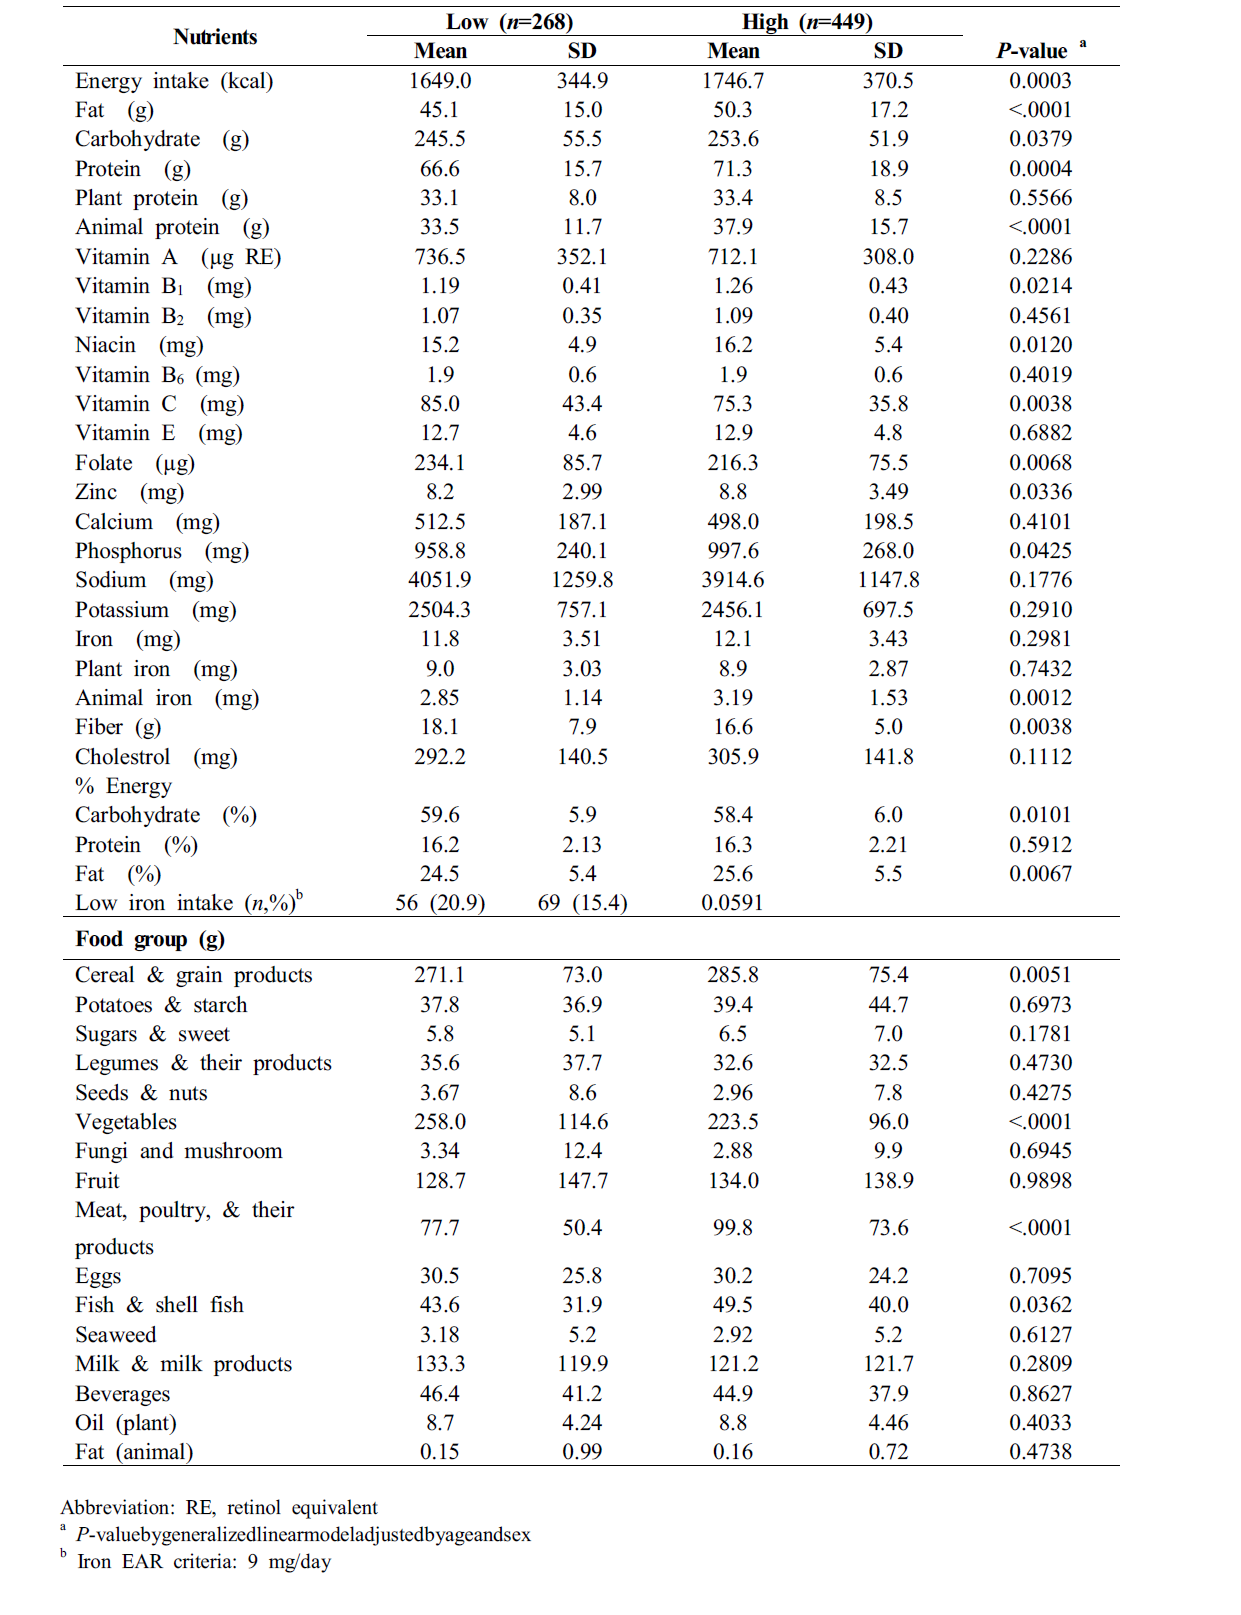 Nutrient and food-group intake of subjects by maternal education level